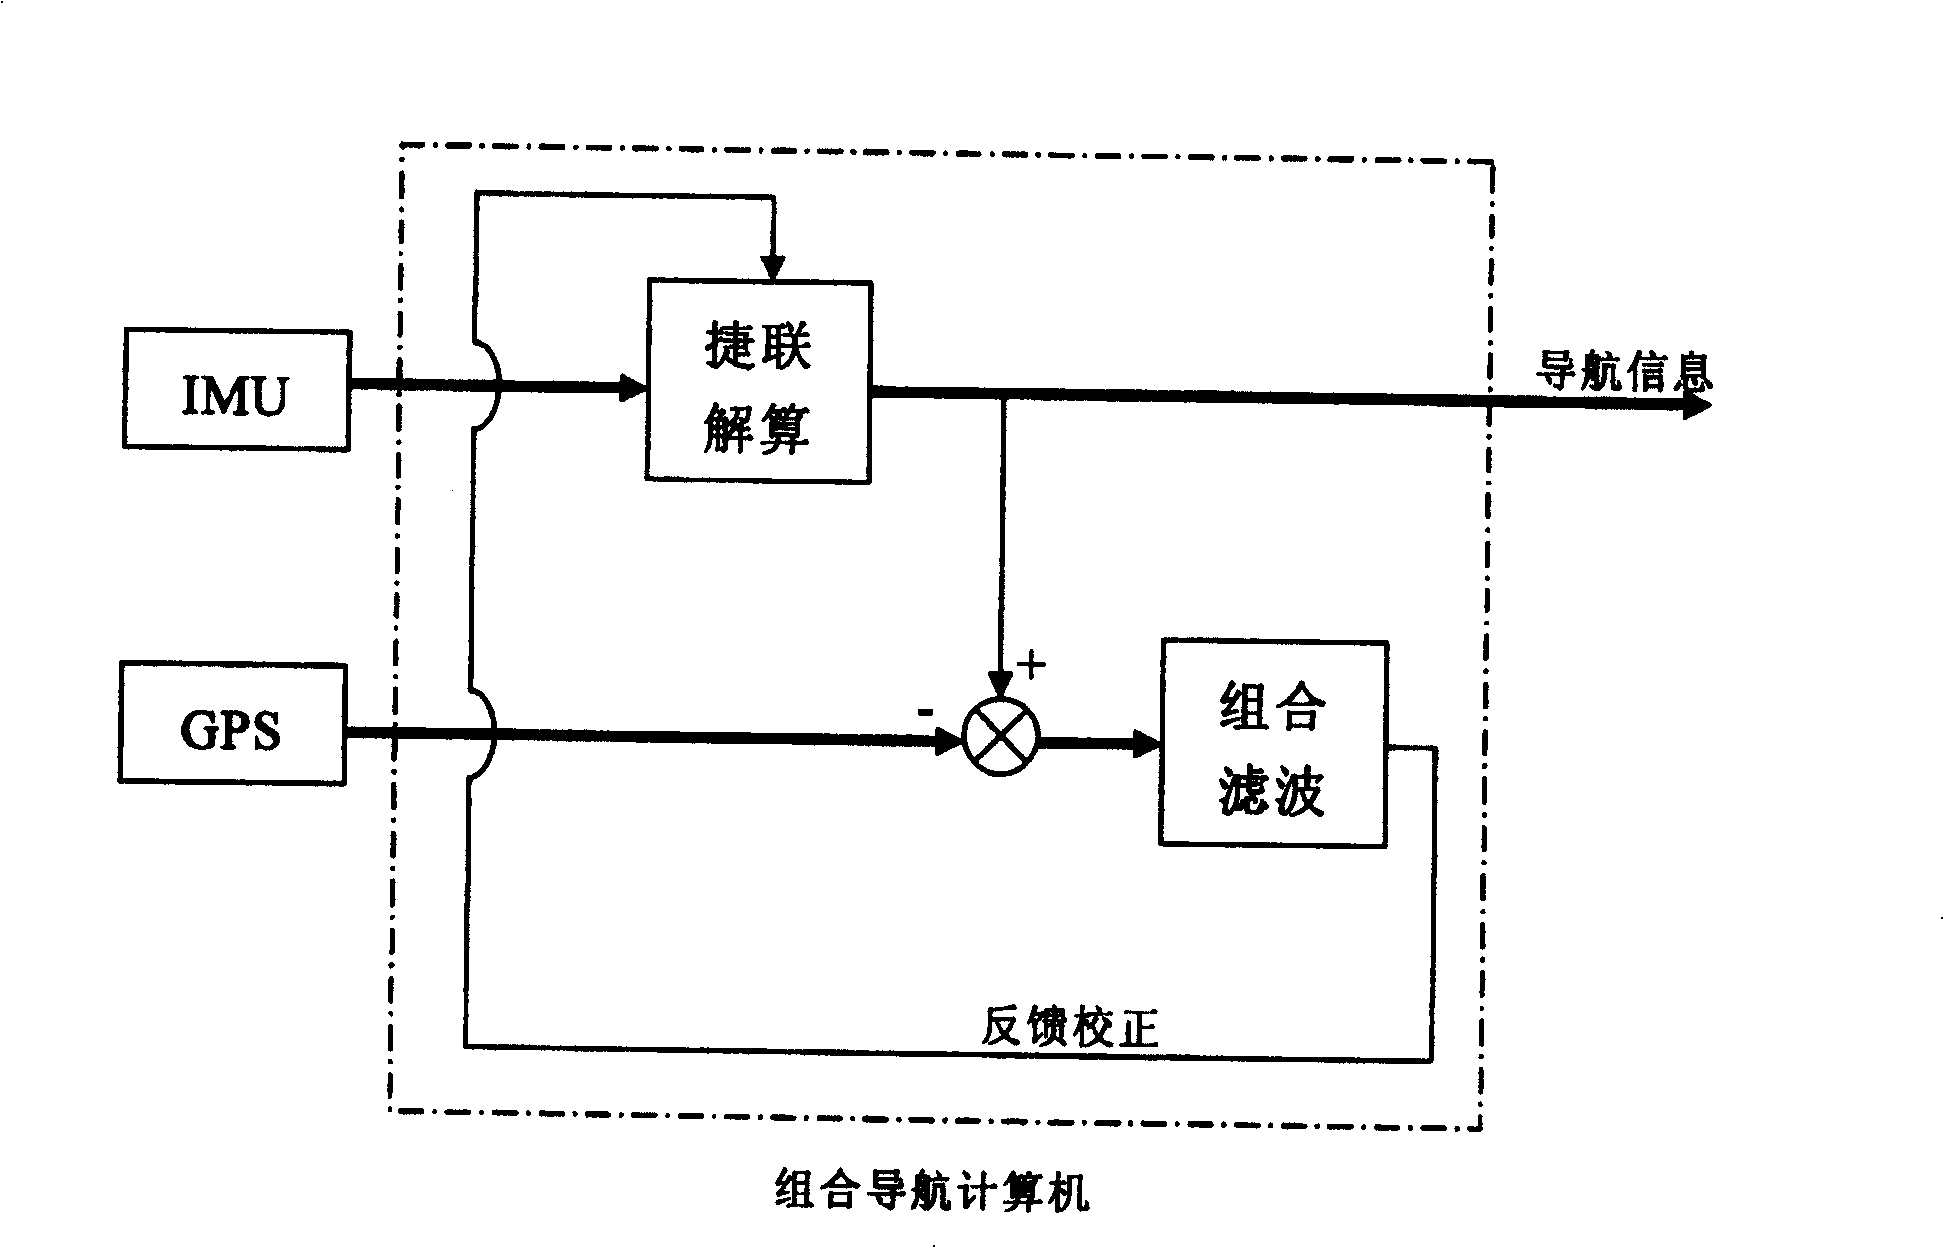 Integrated combined navigation computer based on double DSP